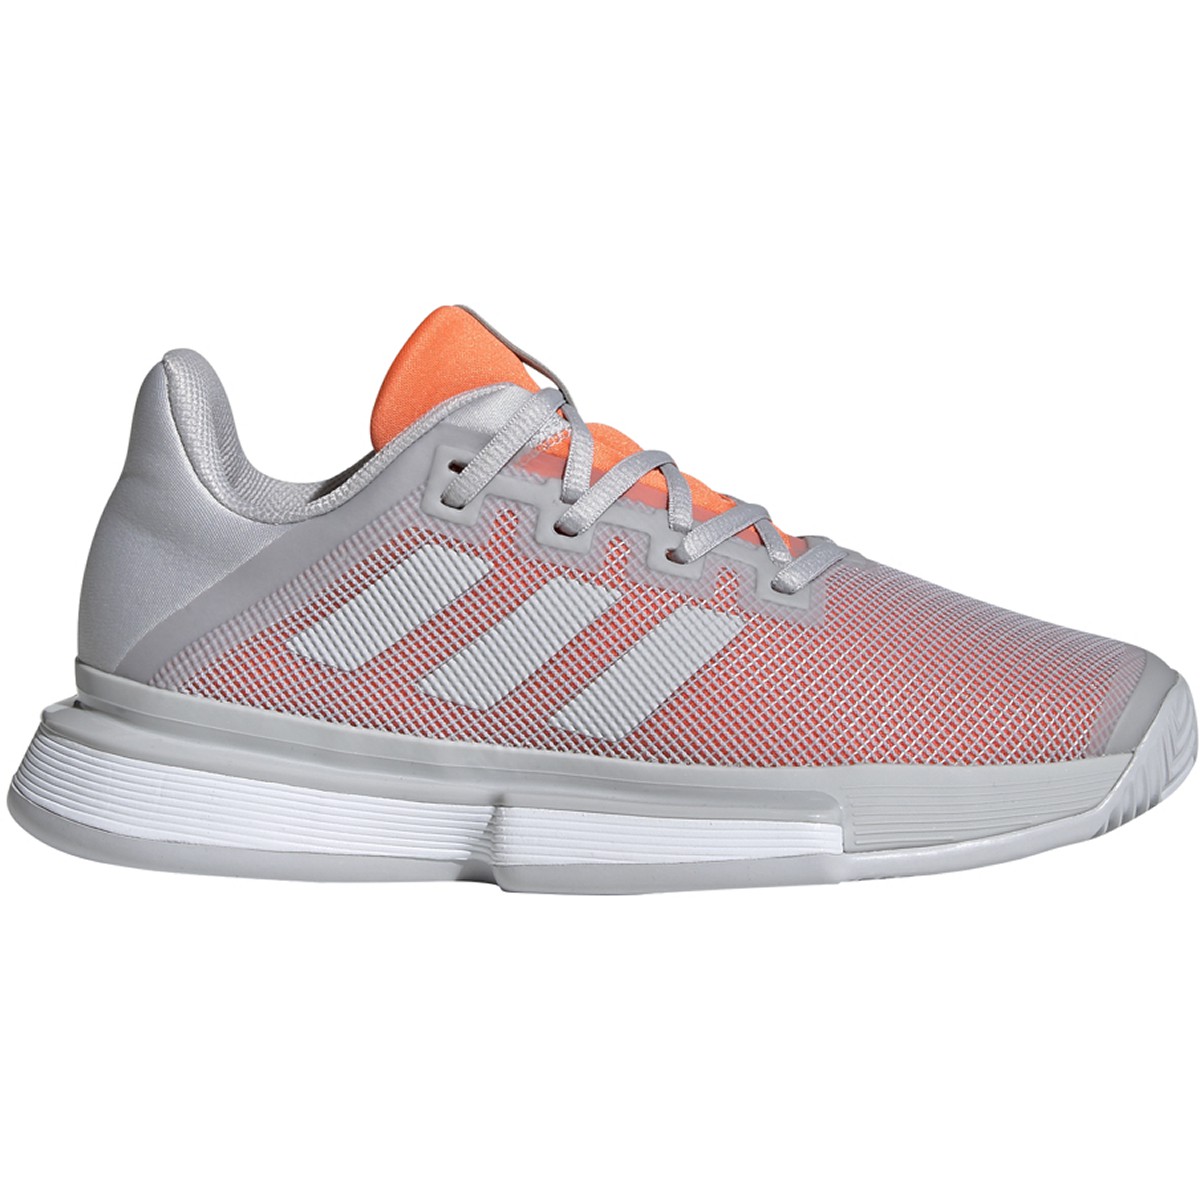 Adidas Women&amp;apos;s SoleMatch Bounce Tennis Shoes (Light Grey Heather/Hi-Res Coral)